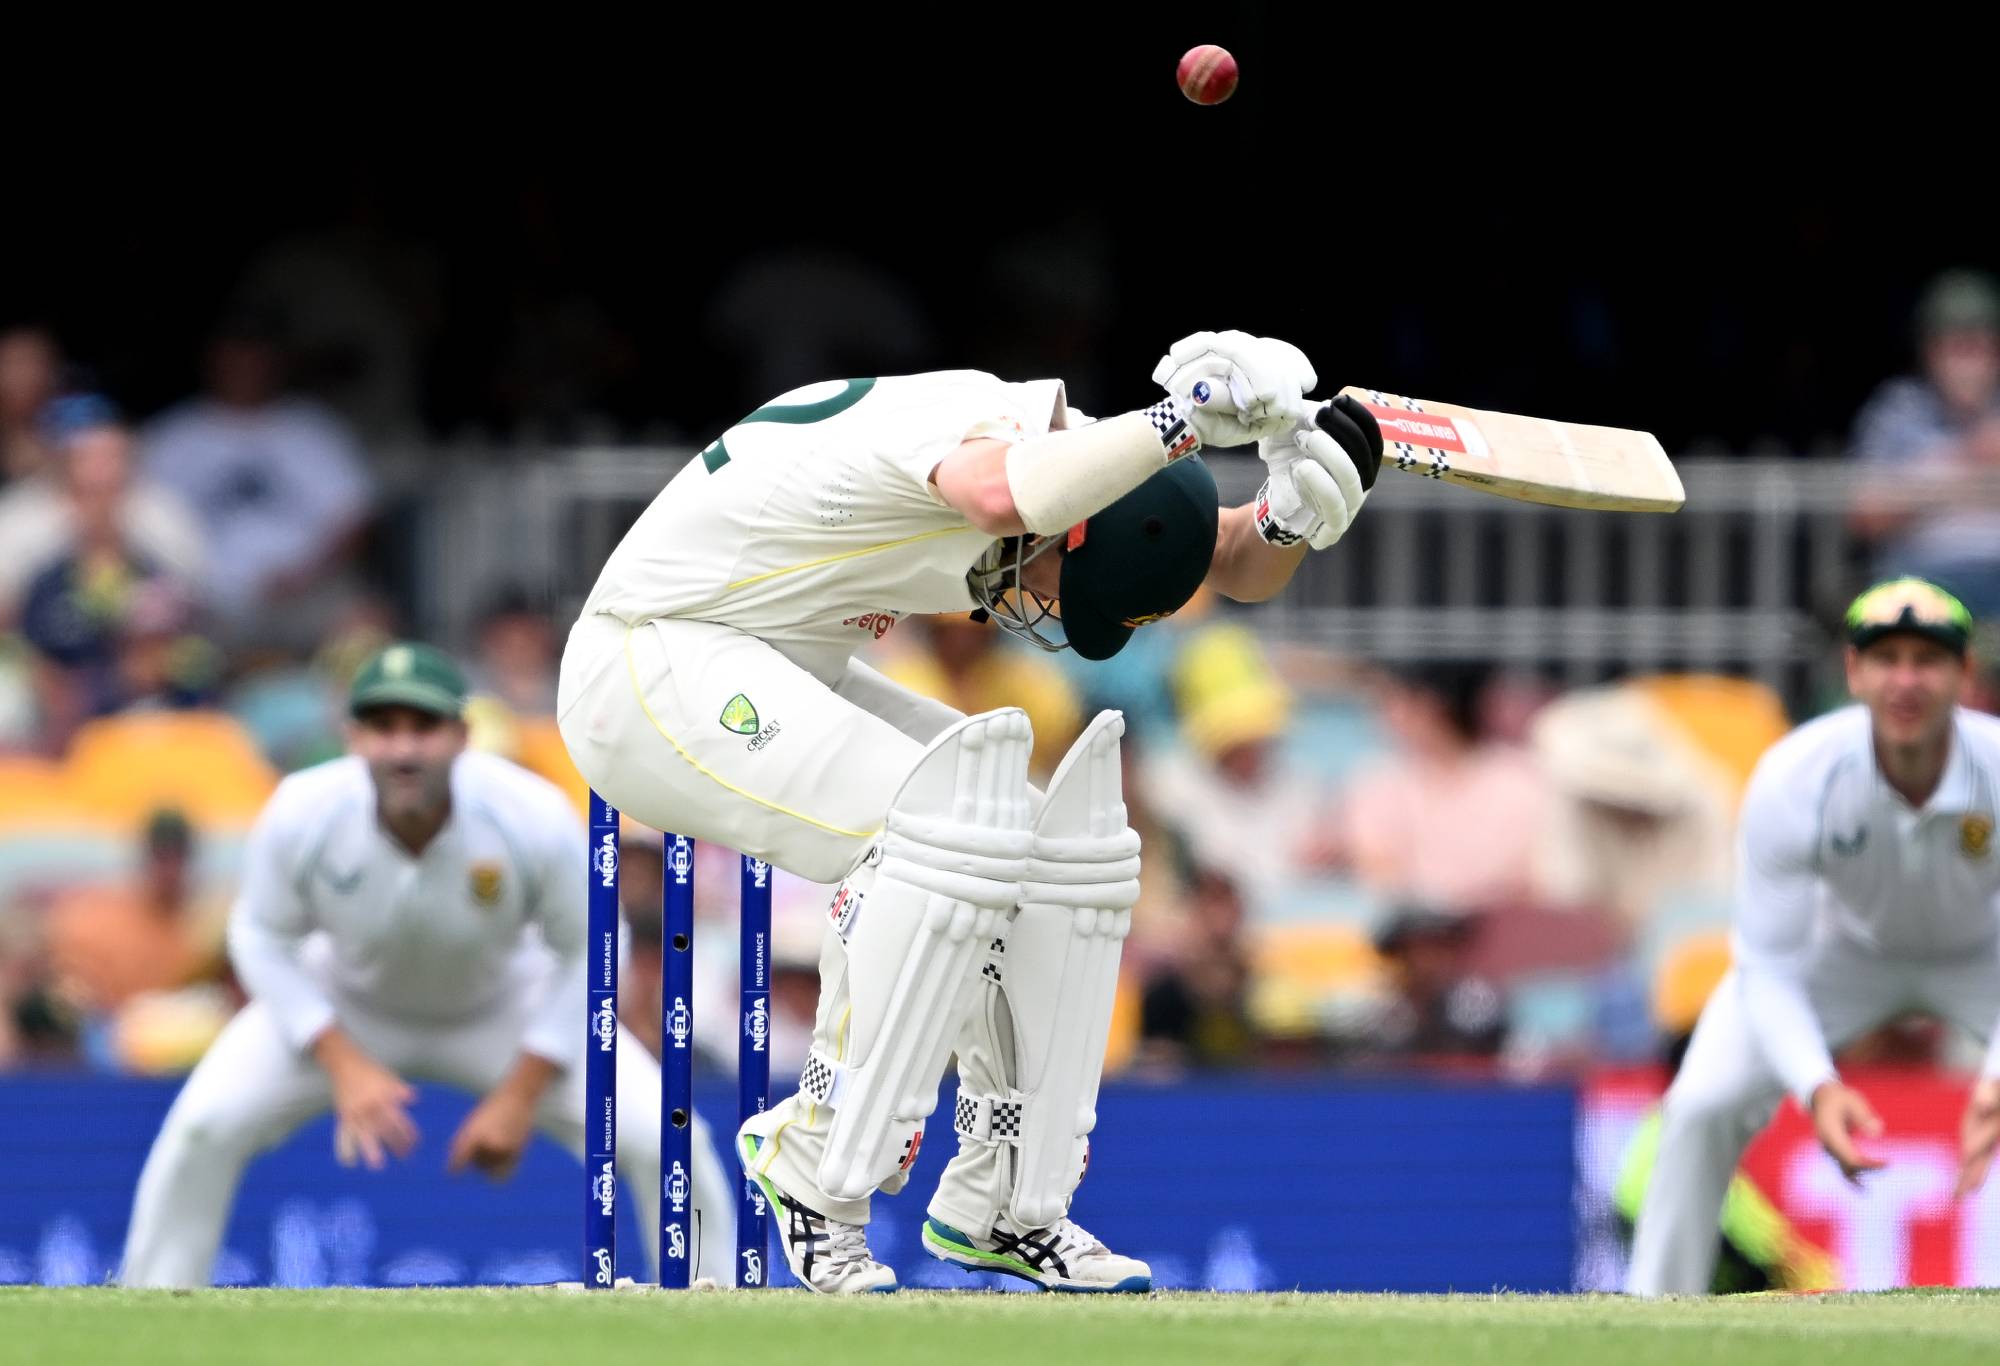 BRISBANE, AUSTRALIA - DECEMBER 18: Travis Head of Australia ducks under a bouncer during day two of the First Test match between Australia and South Africa at The Gabba on December 18, 2022 in Brisbane, Australia. (Photo by Bradley Kanaris/Getty Images)